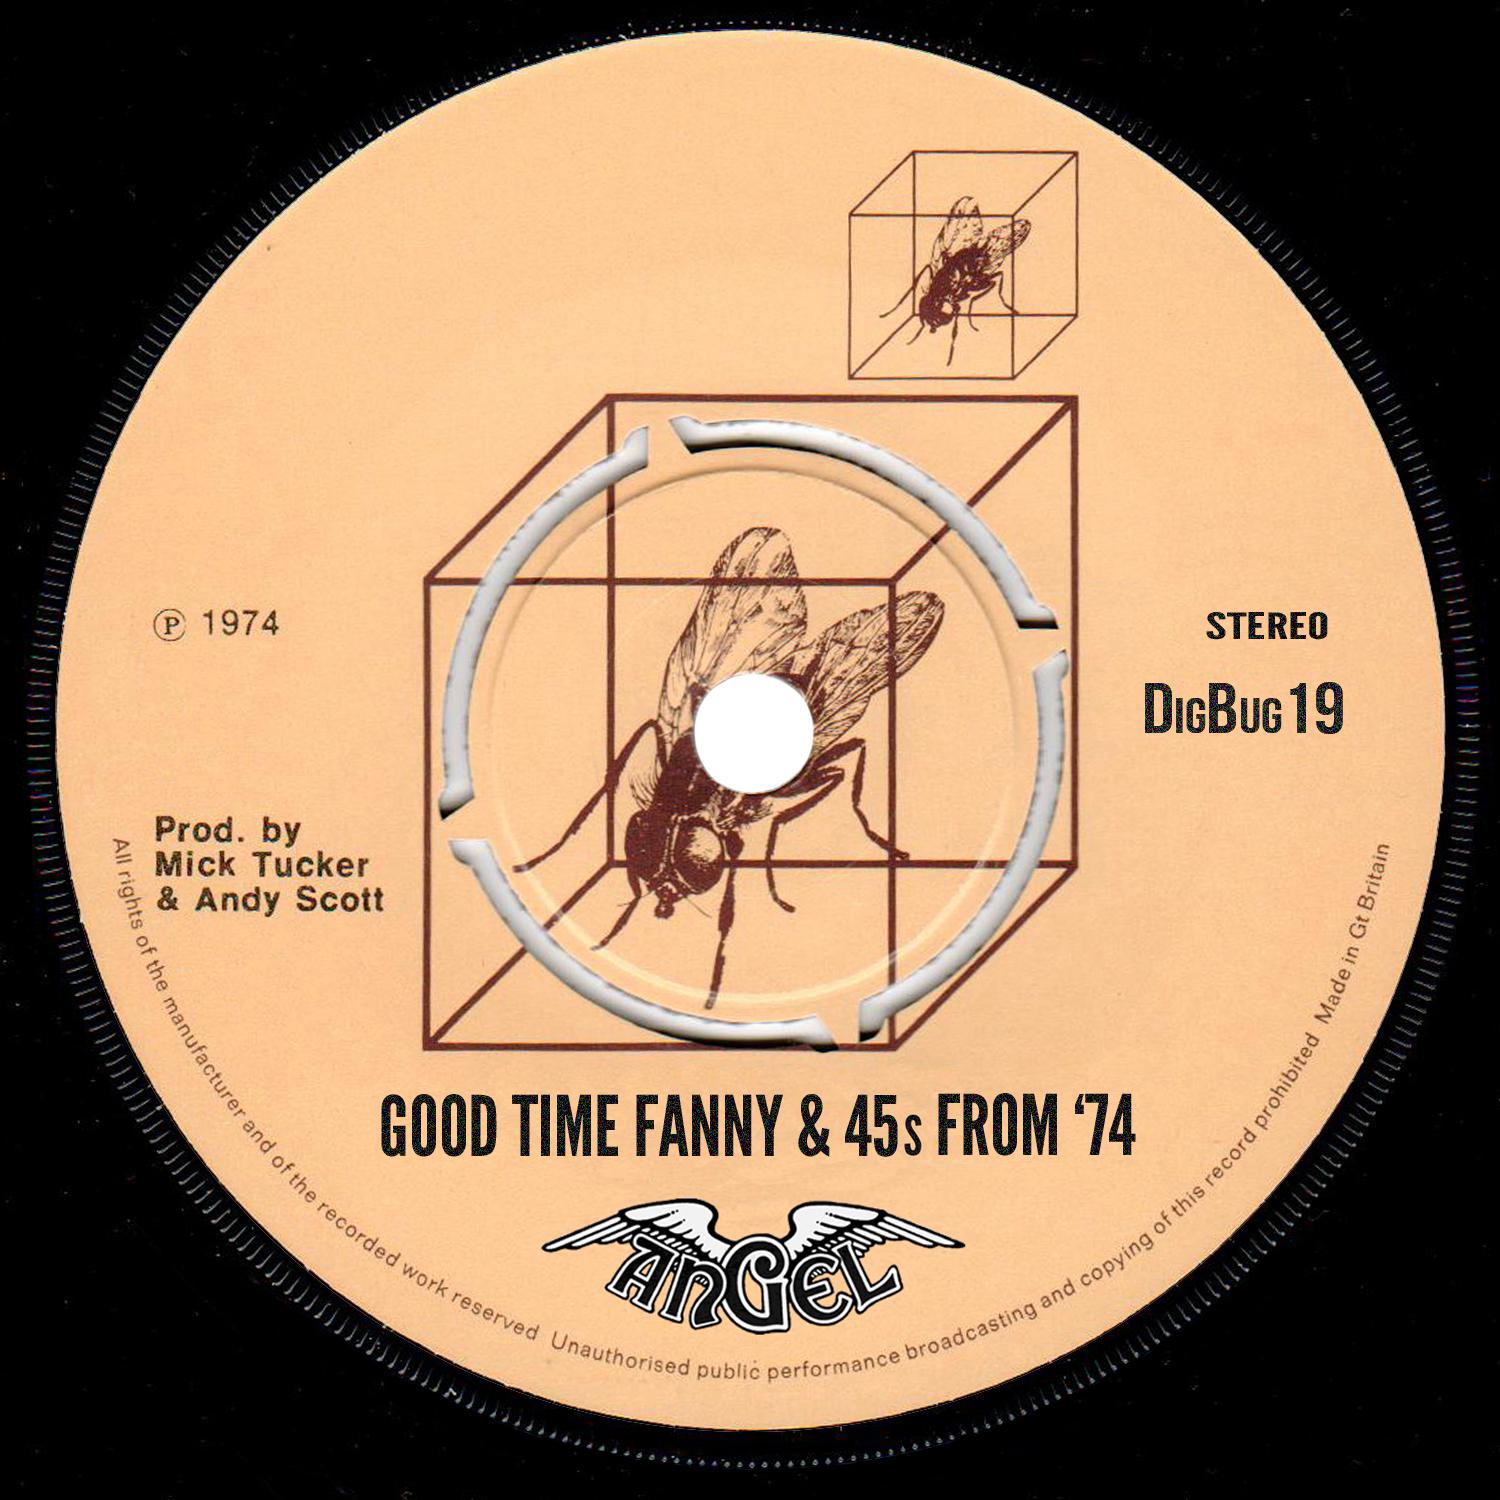 Good Time Fanny & 45s from '74